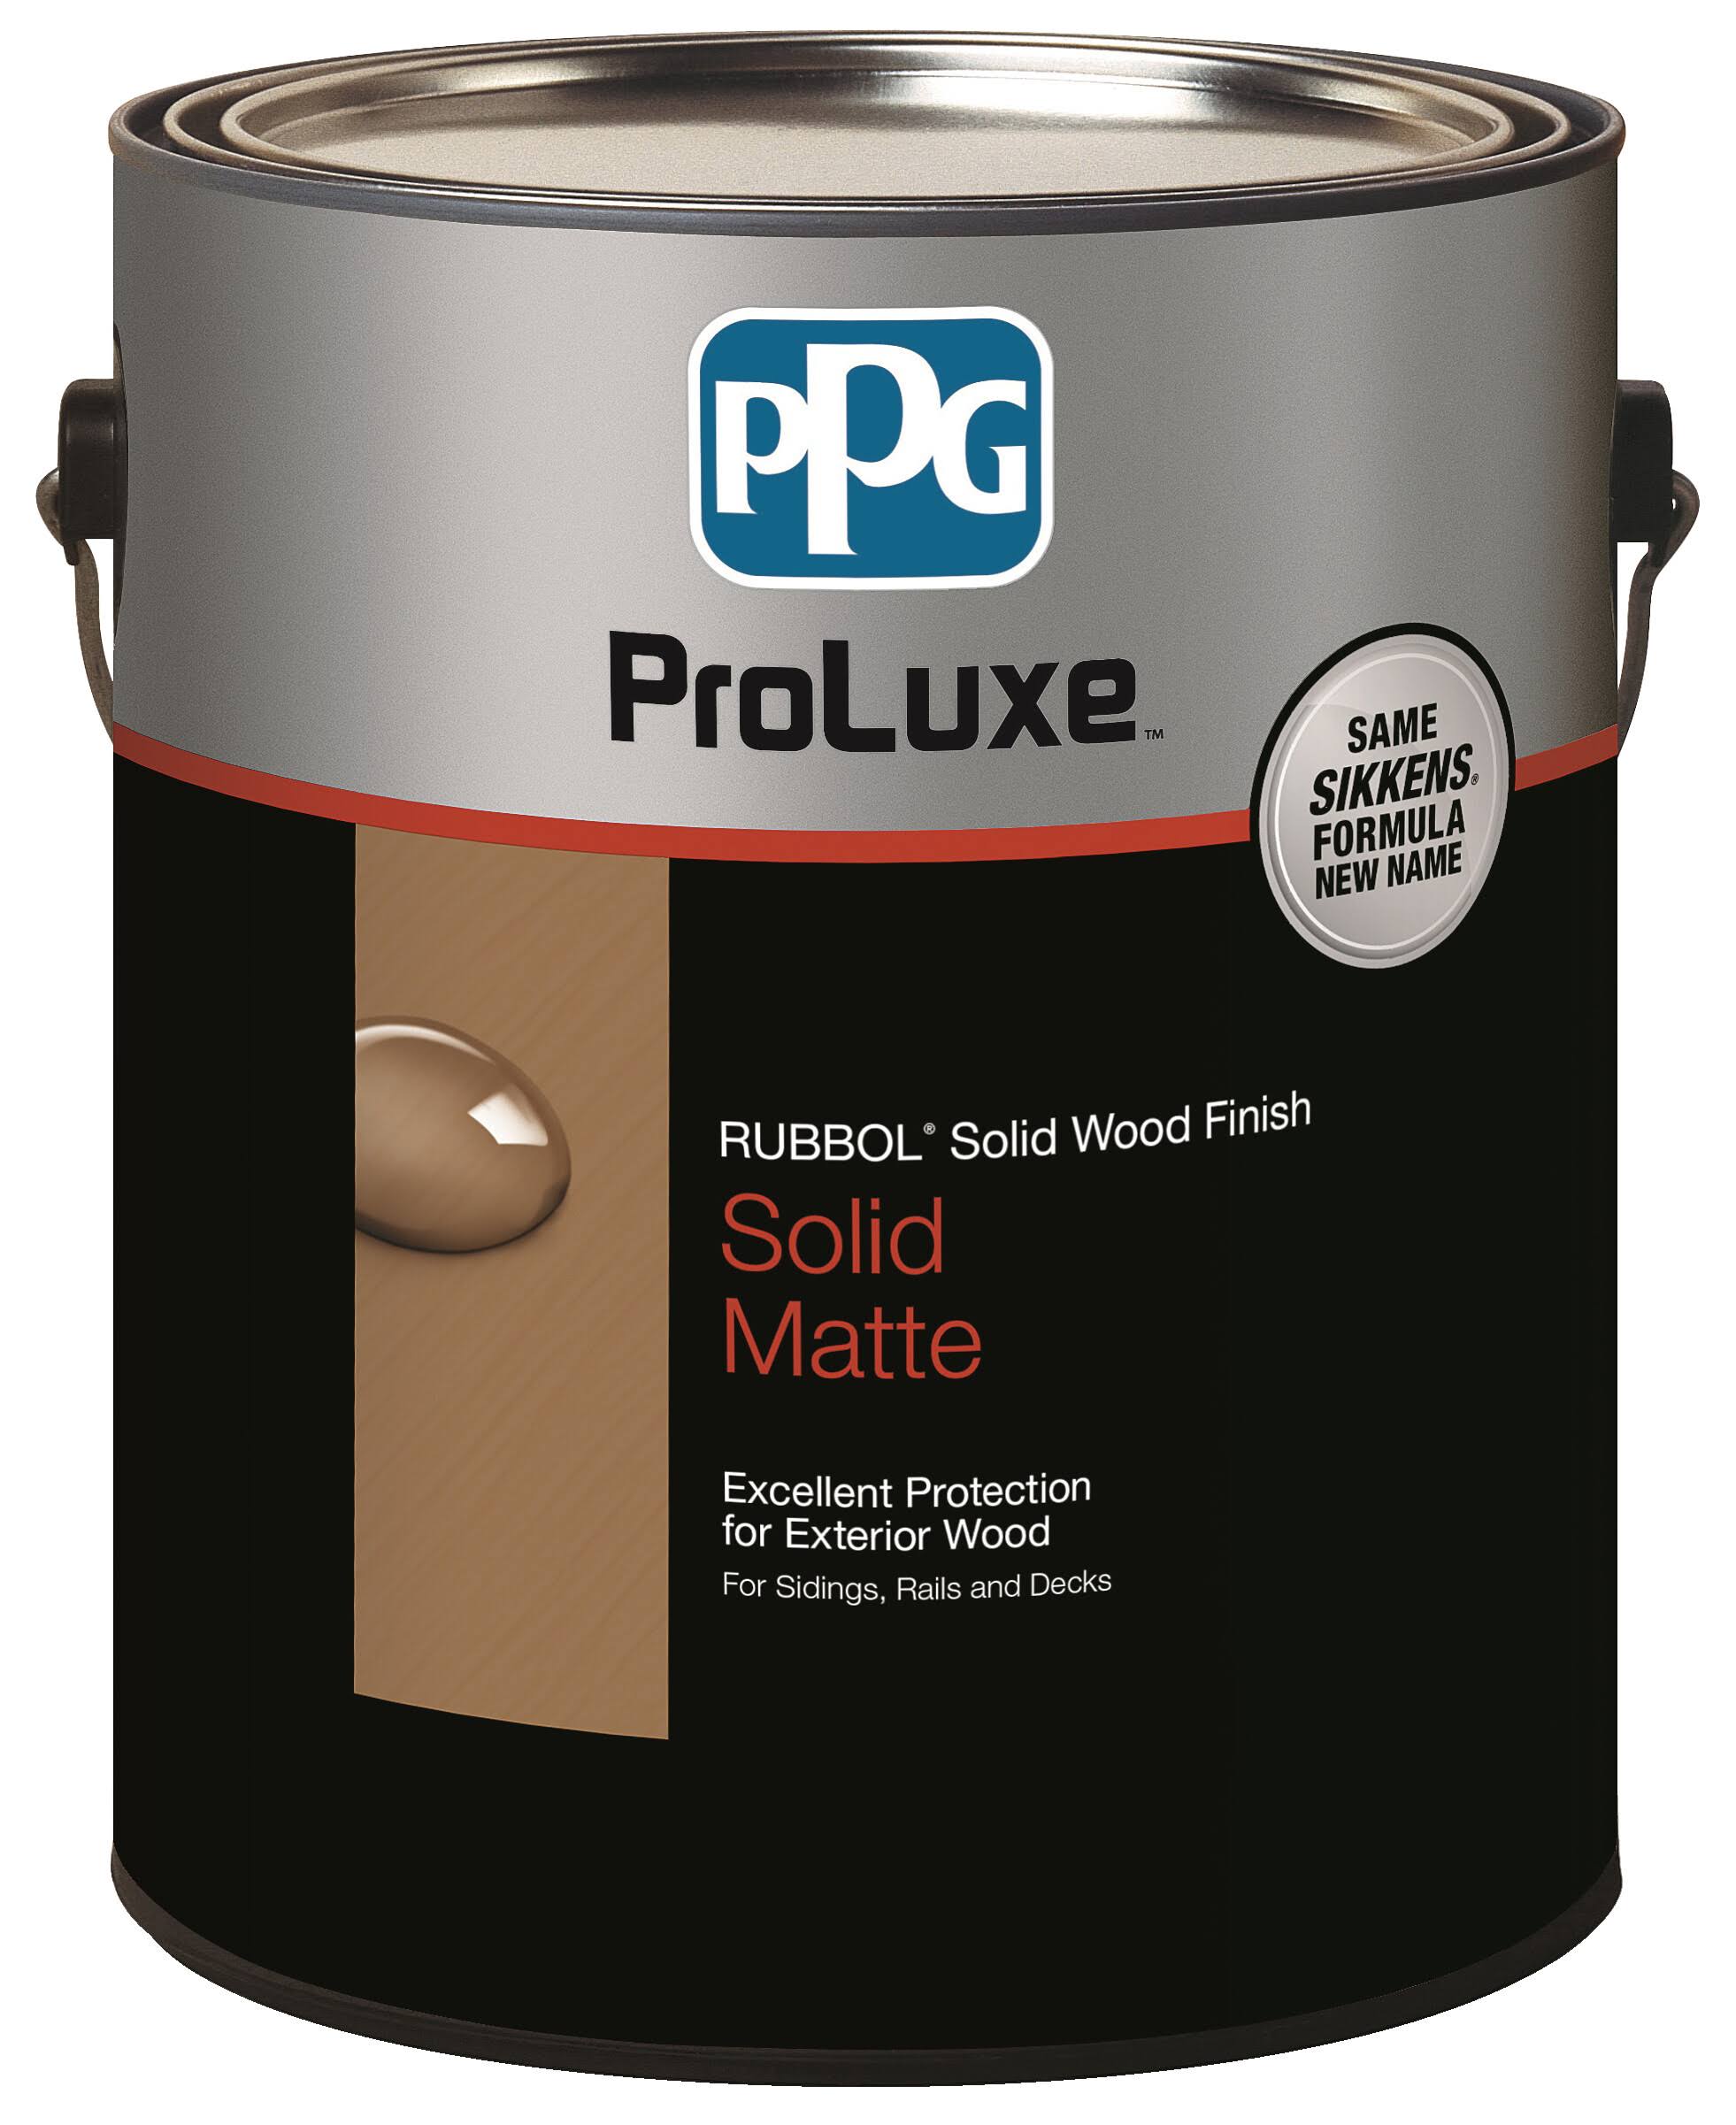 Sikkens ProLuxe Deep Base Rubbol Solid Deep Exterior Wood Finish - Light Base 110, 1gal